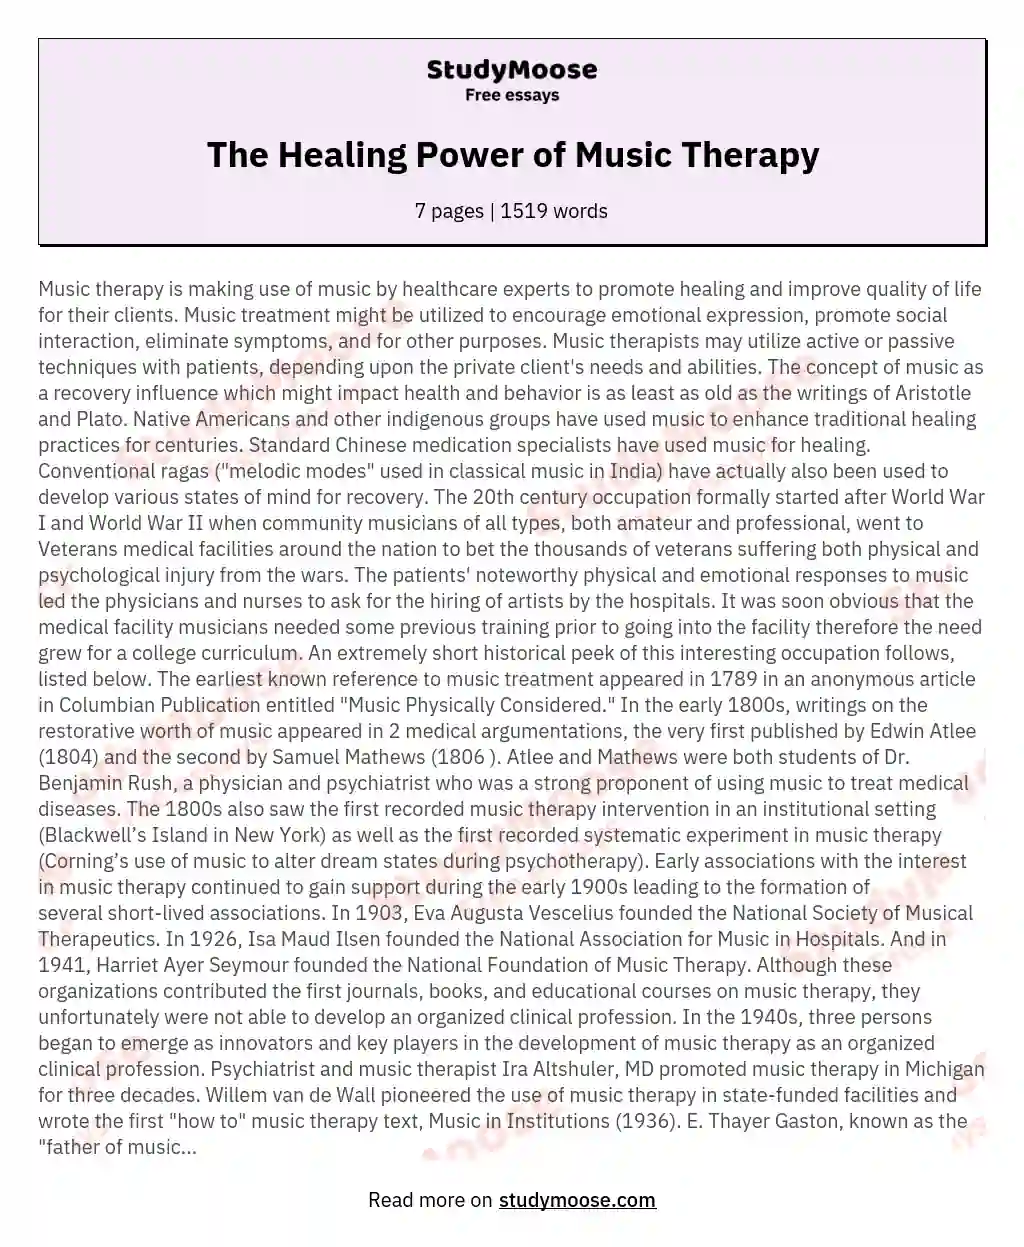 The Healing Power of Music Therapy essay